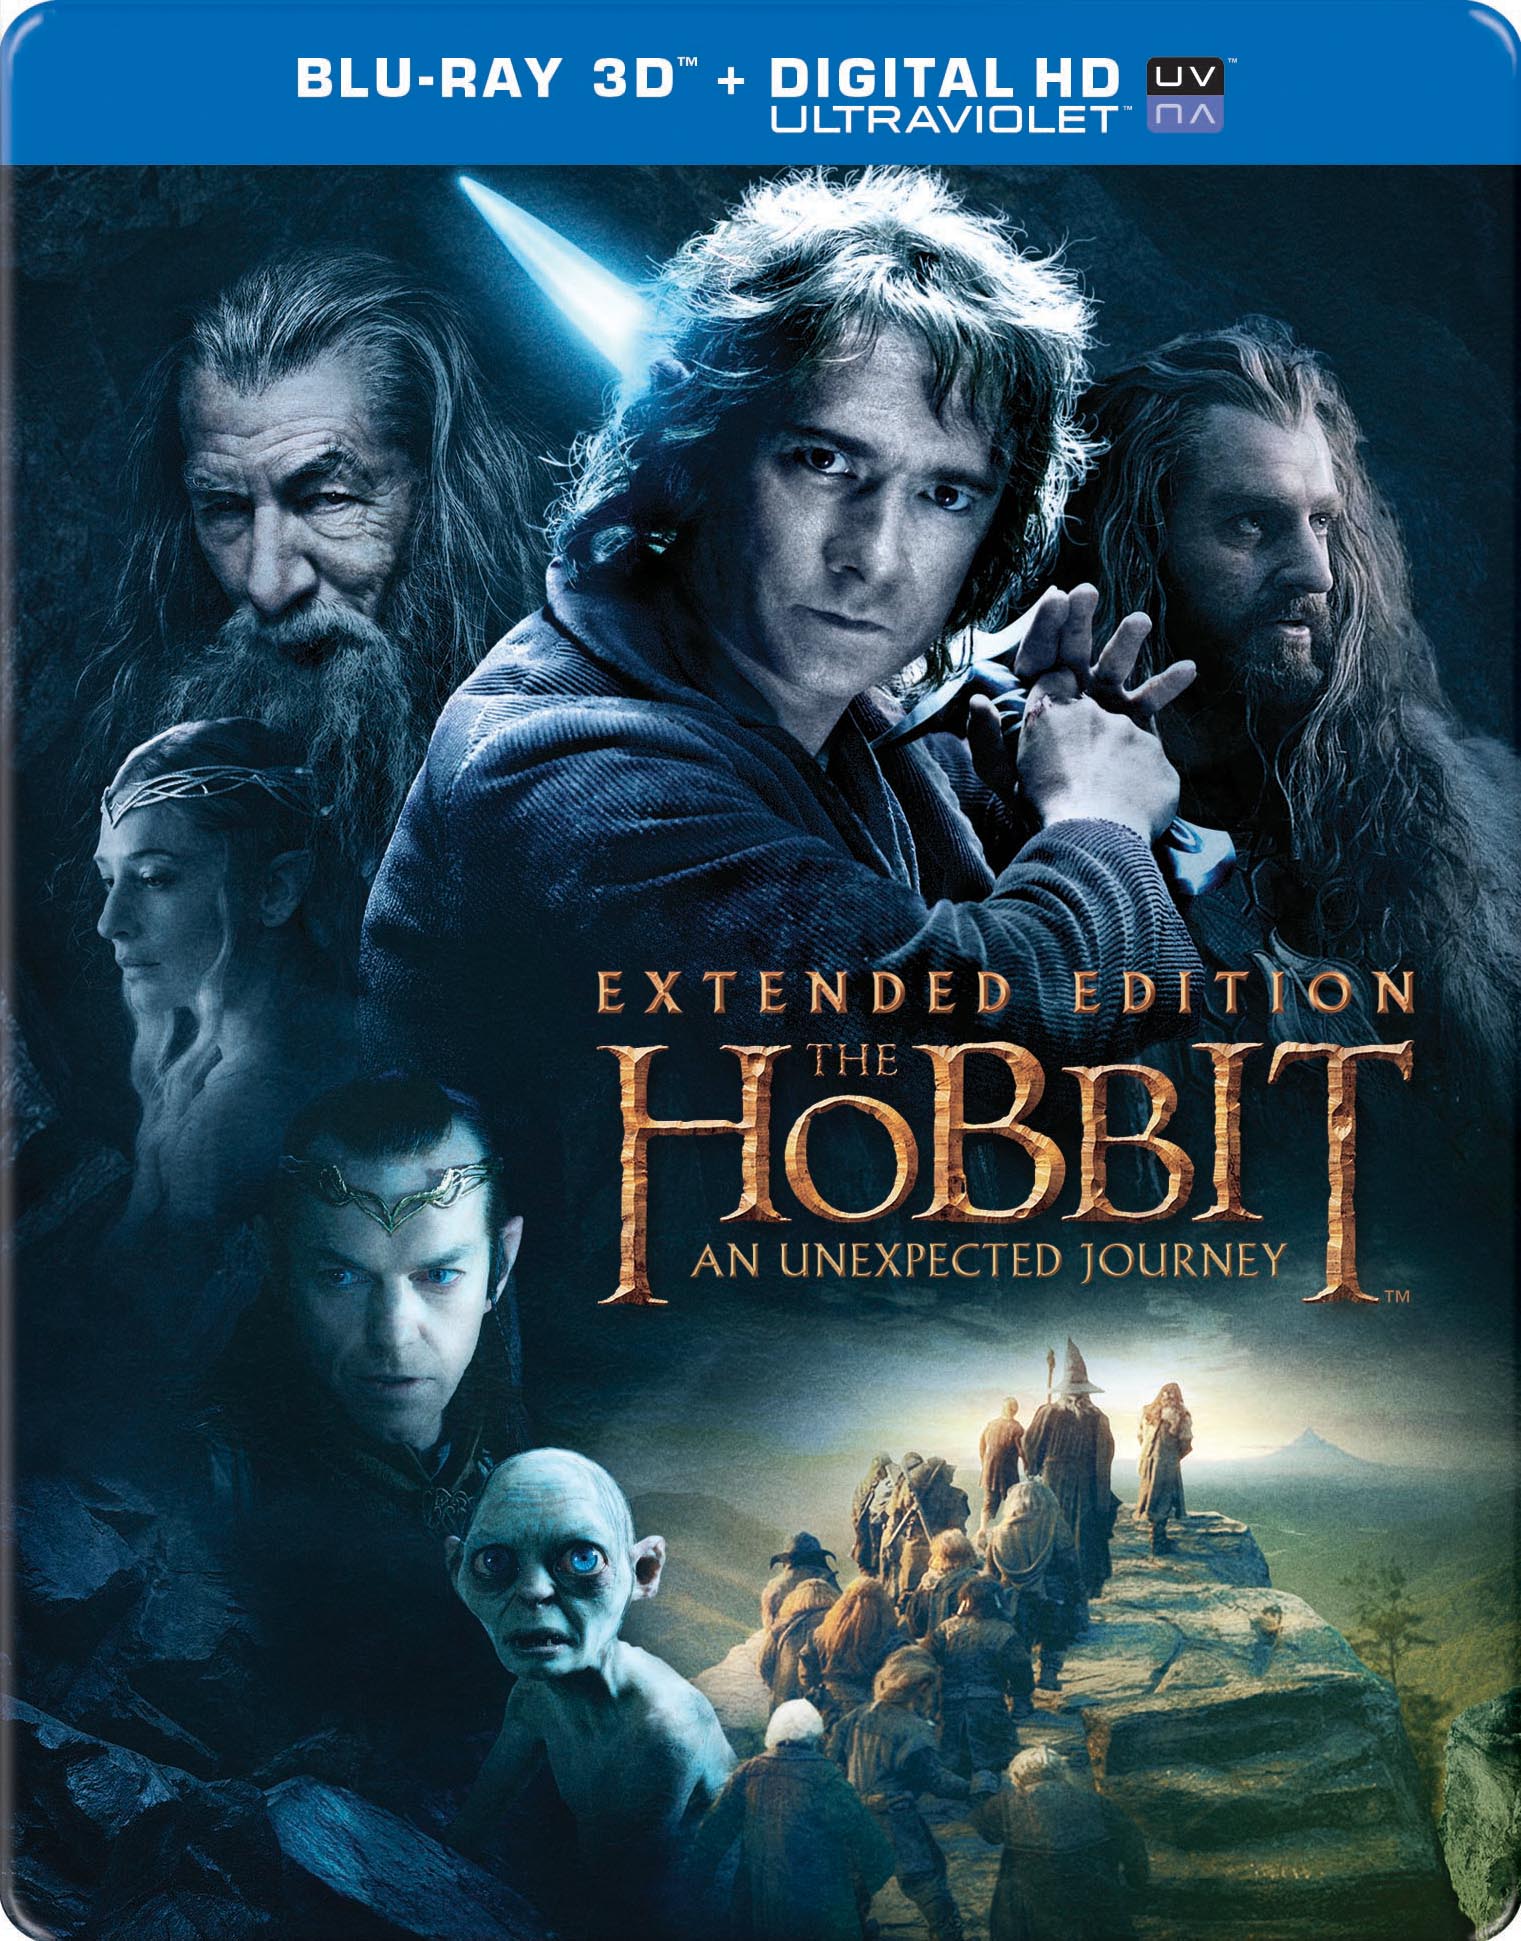 The Hobbit: An Unexpected Journey, Full Movie